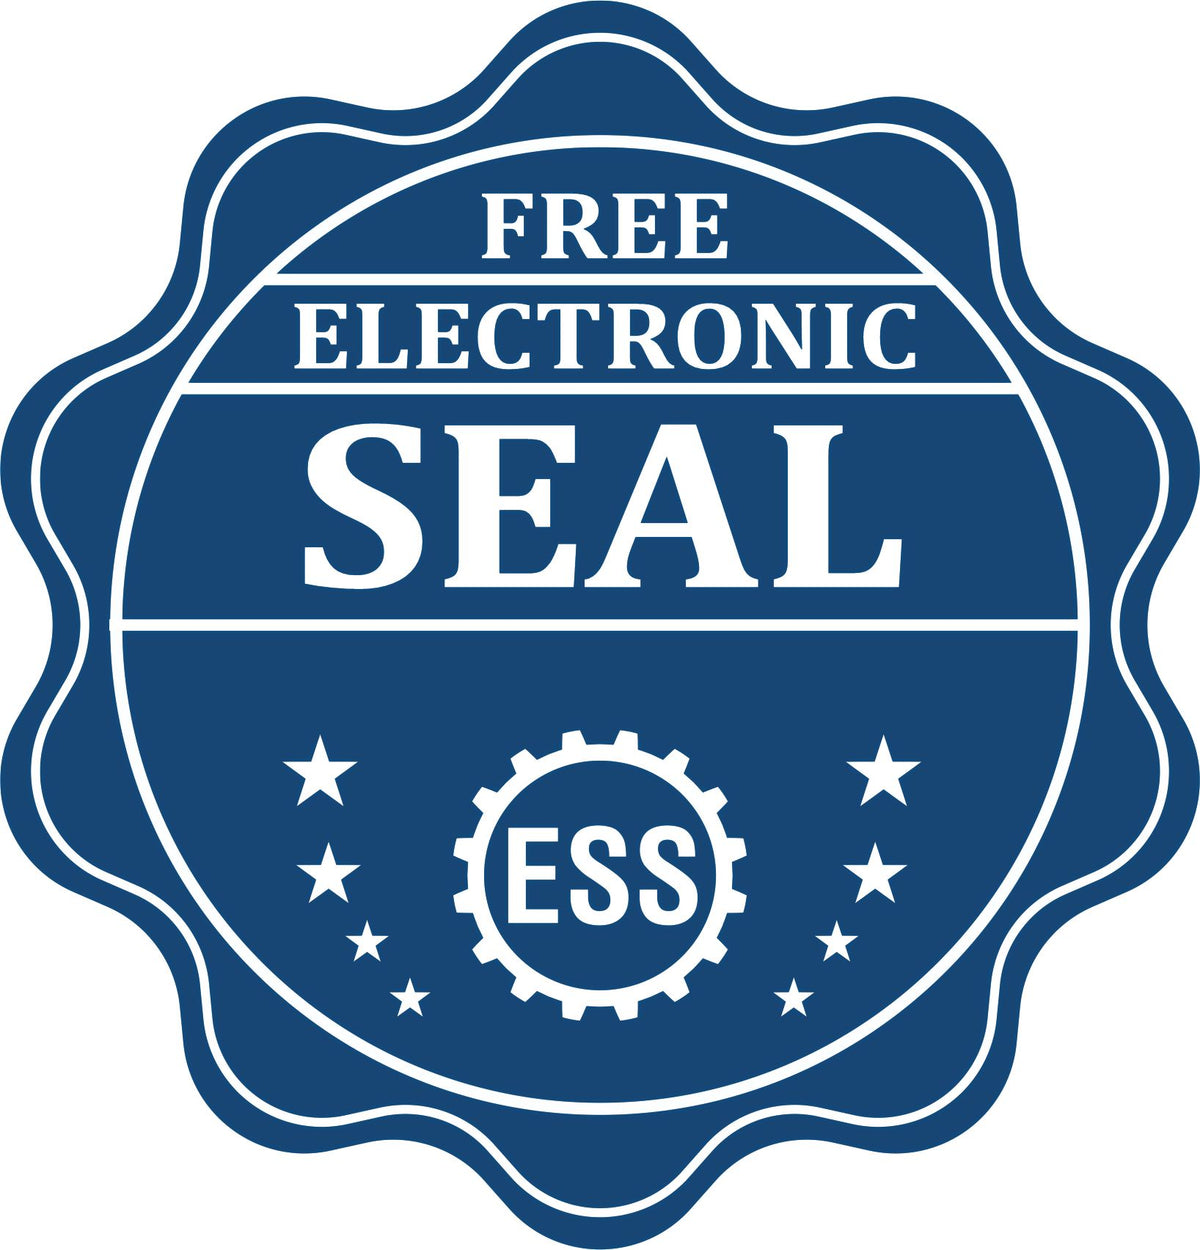 A badge showing a free electronic seal for the Slim Pre-Inked Utah Landscape Architect Seal Stamp with stars and the ESS gear on the emblem.